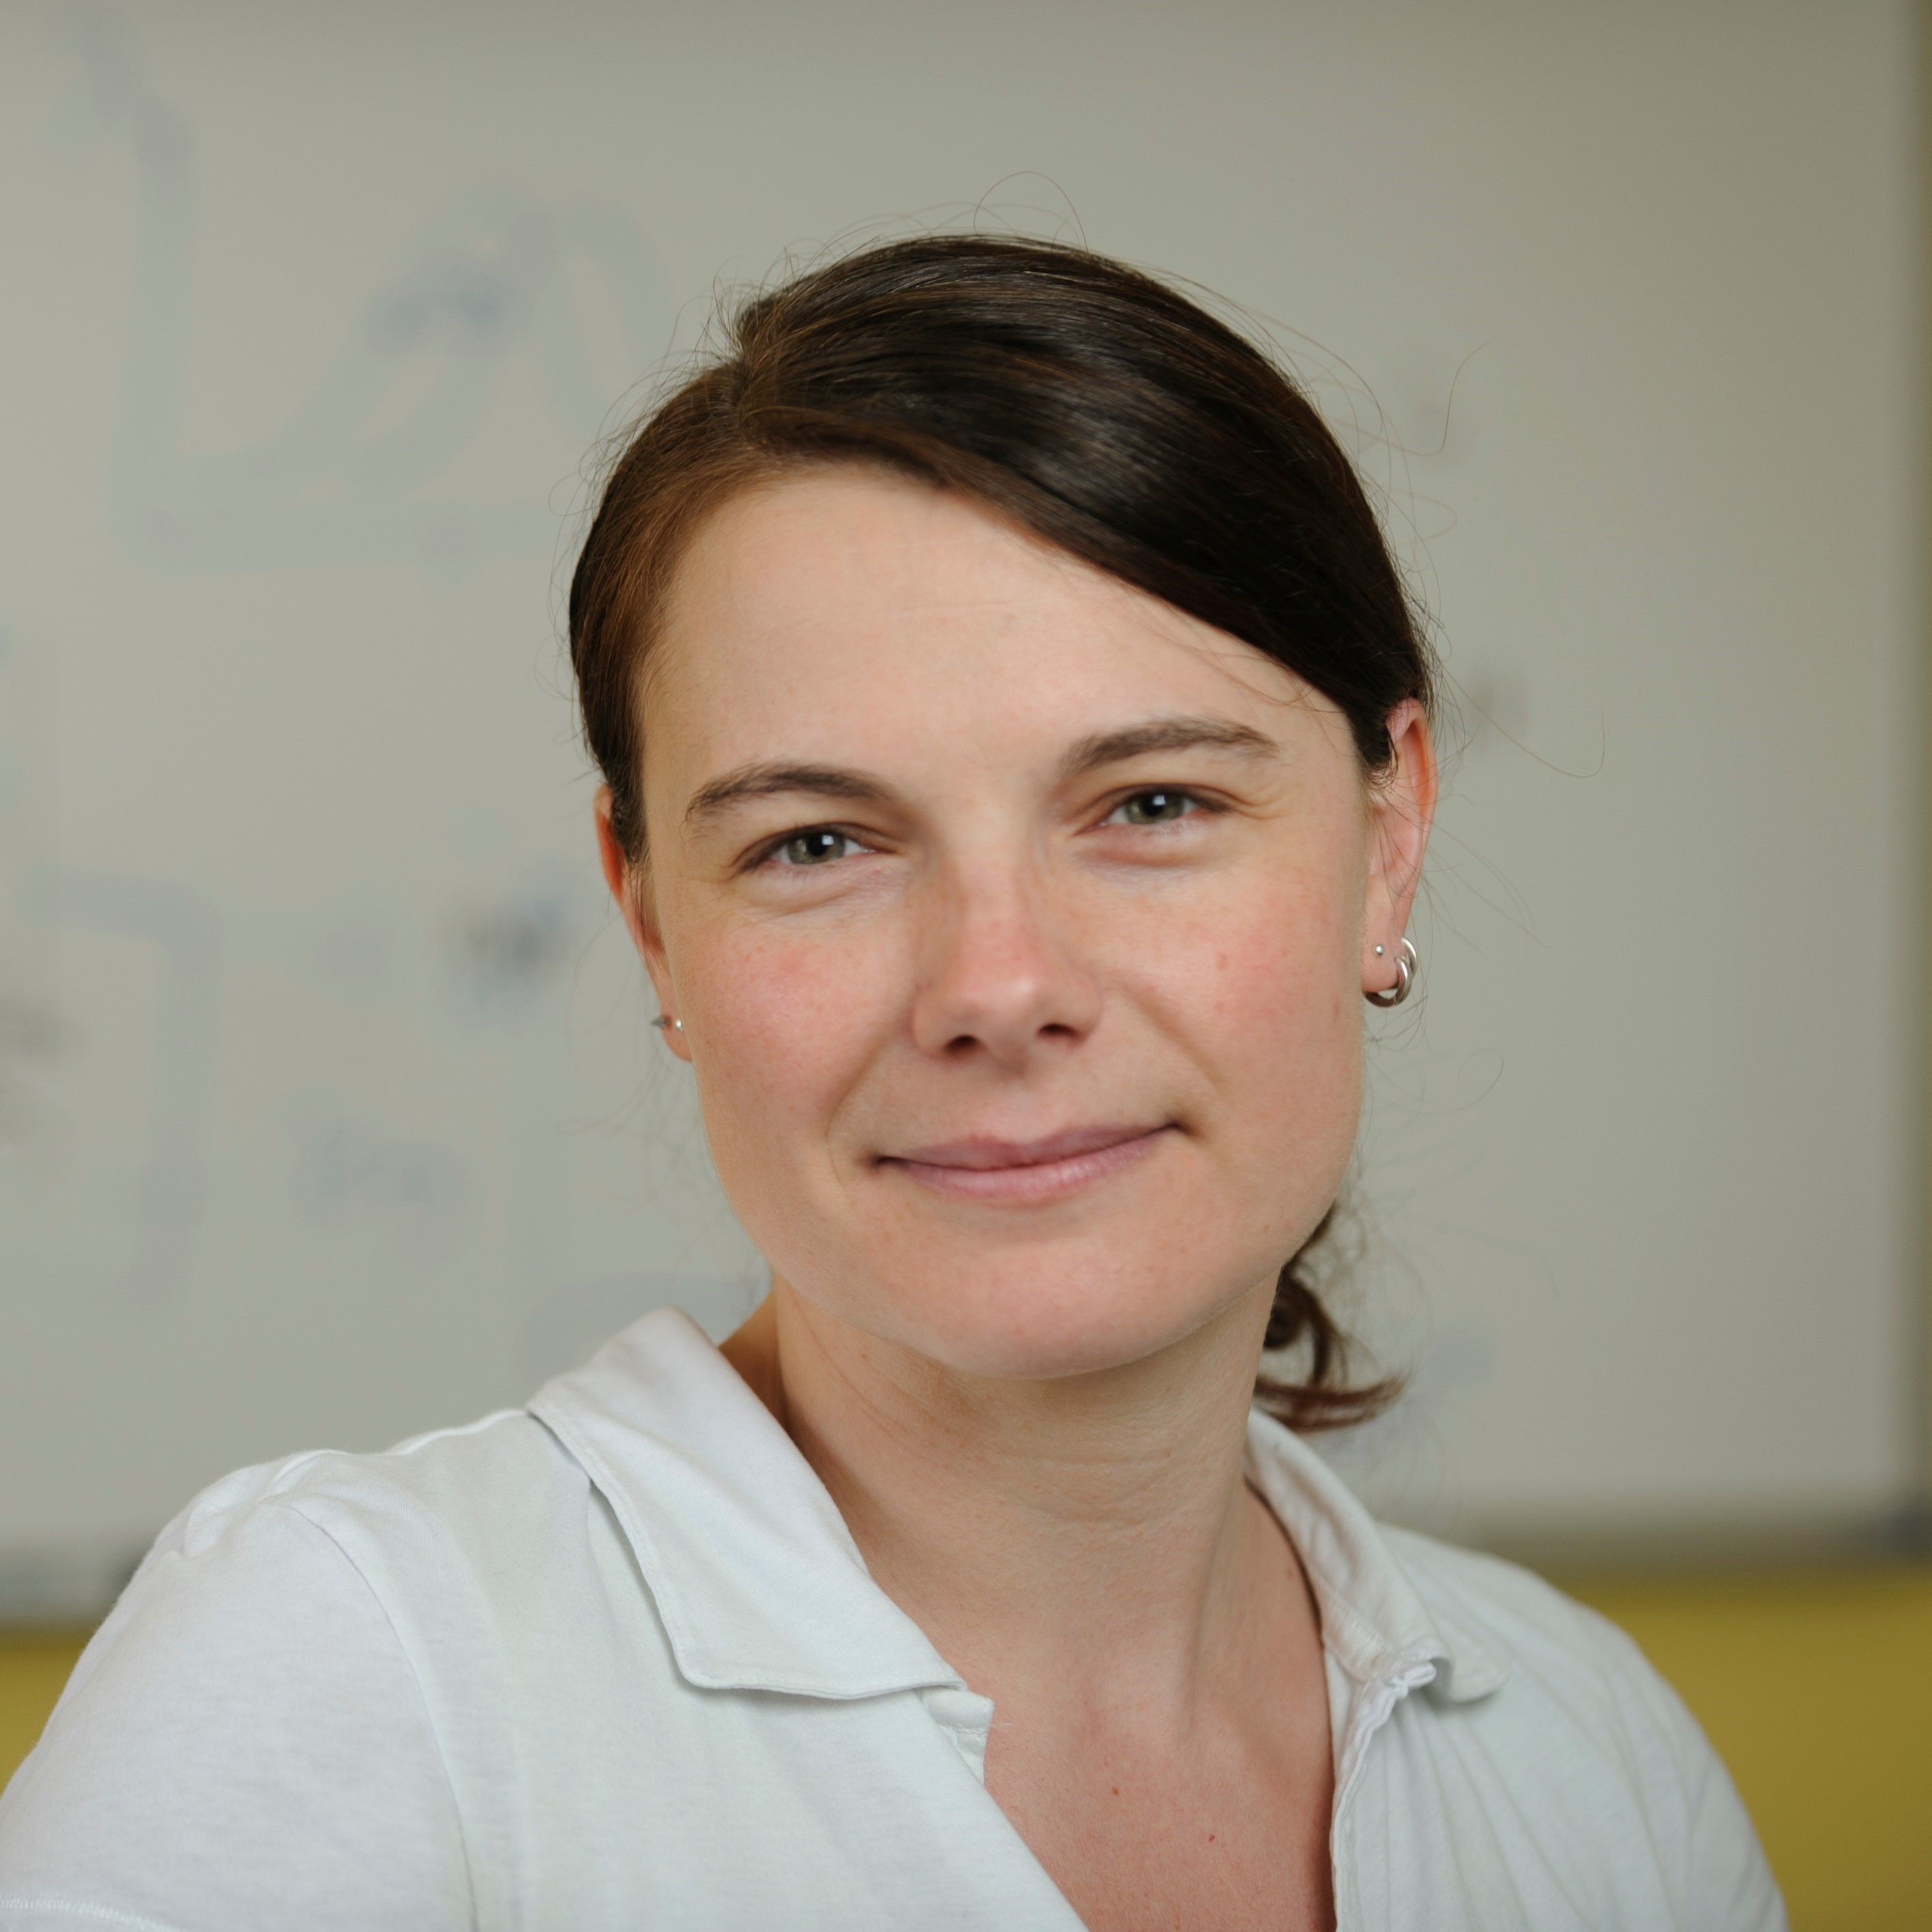 Dr. Loesgen and Colleagues Publish in Journal Cancers